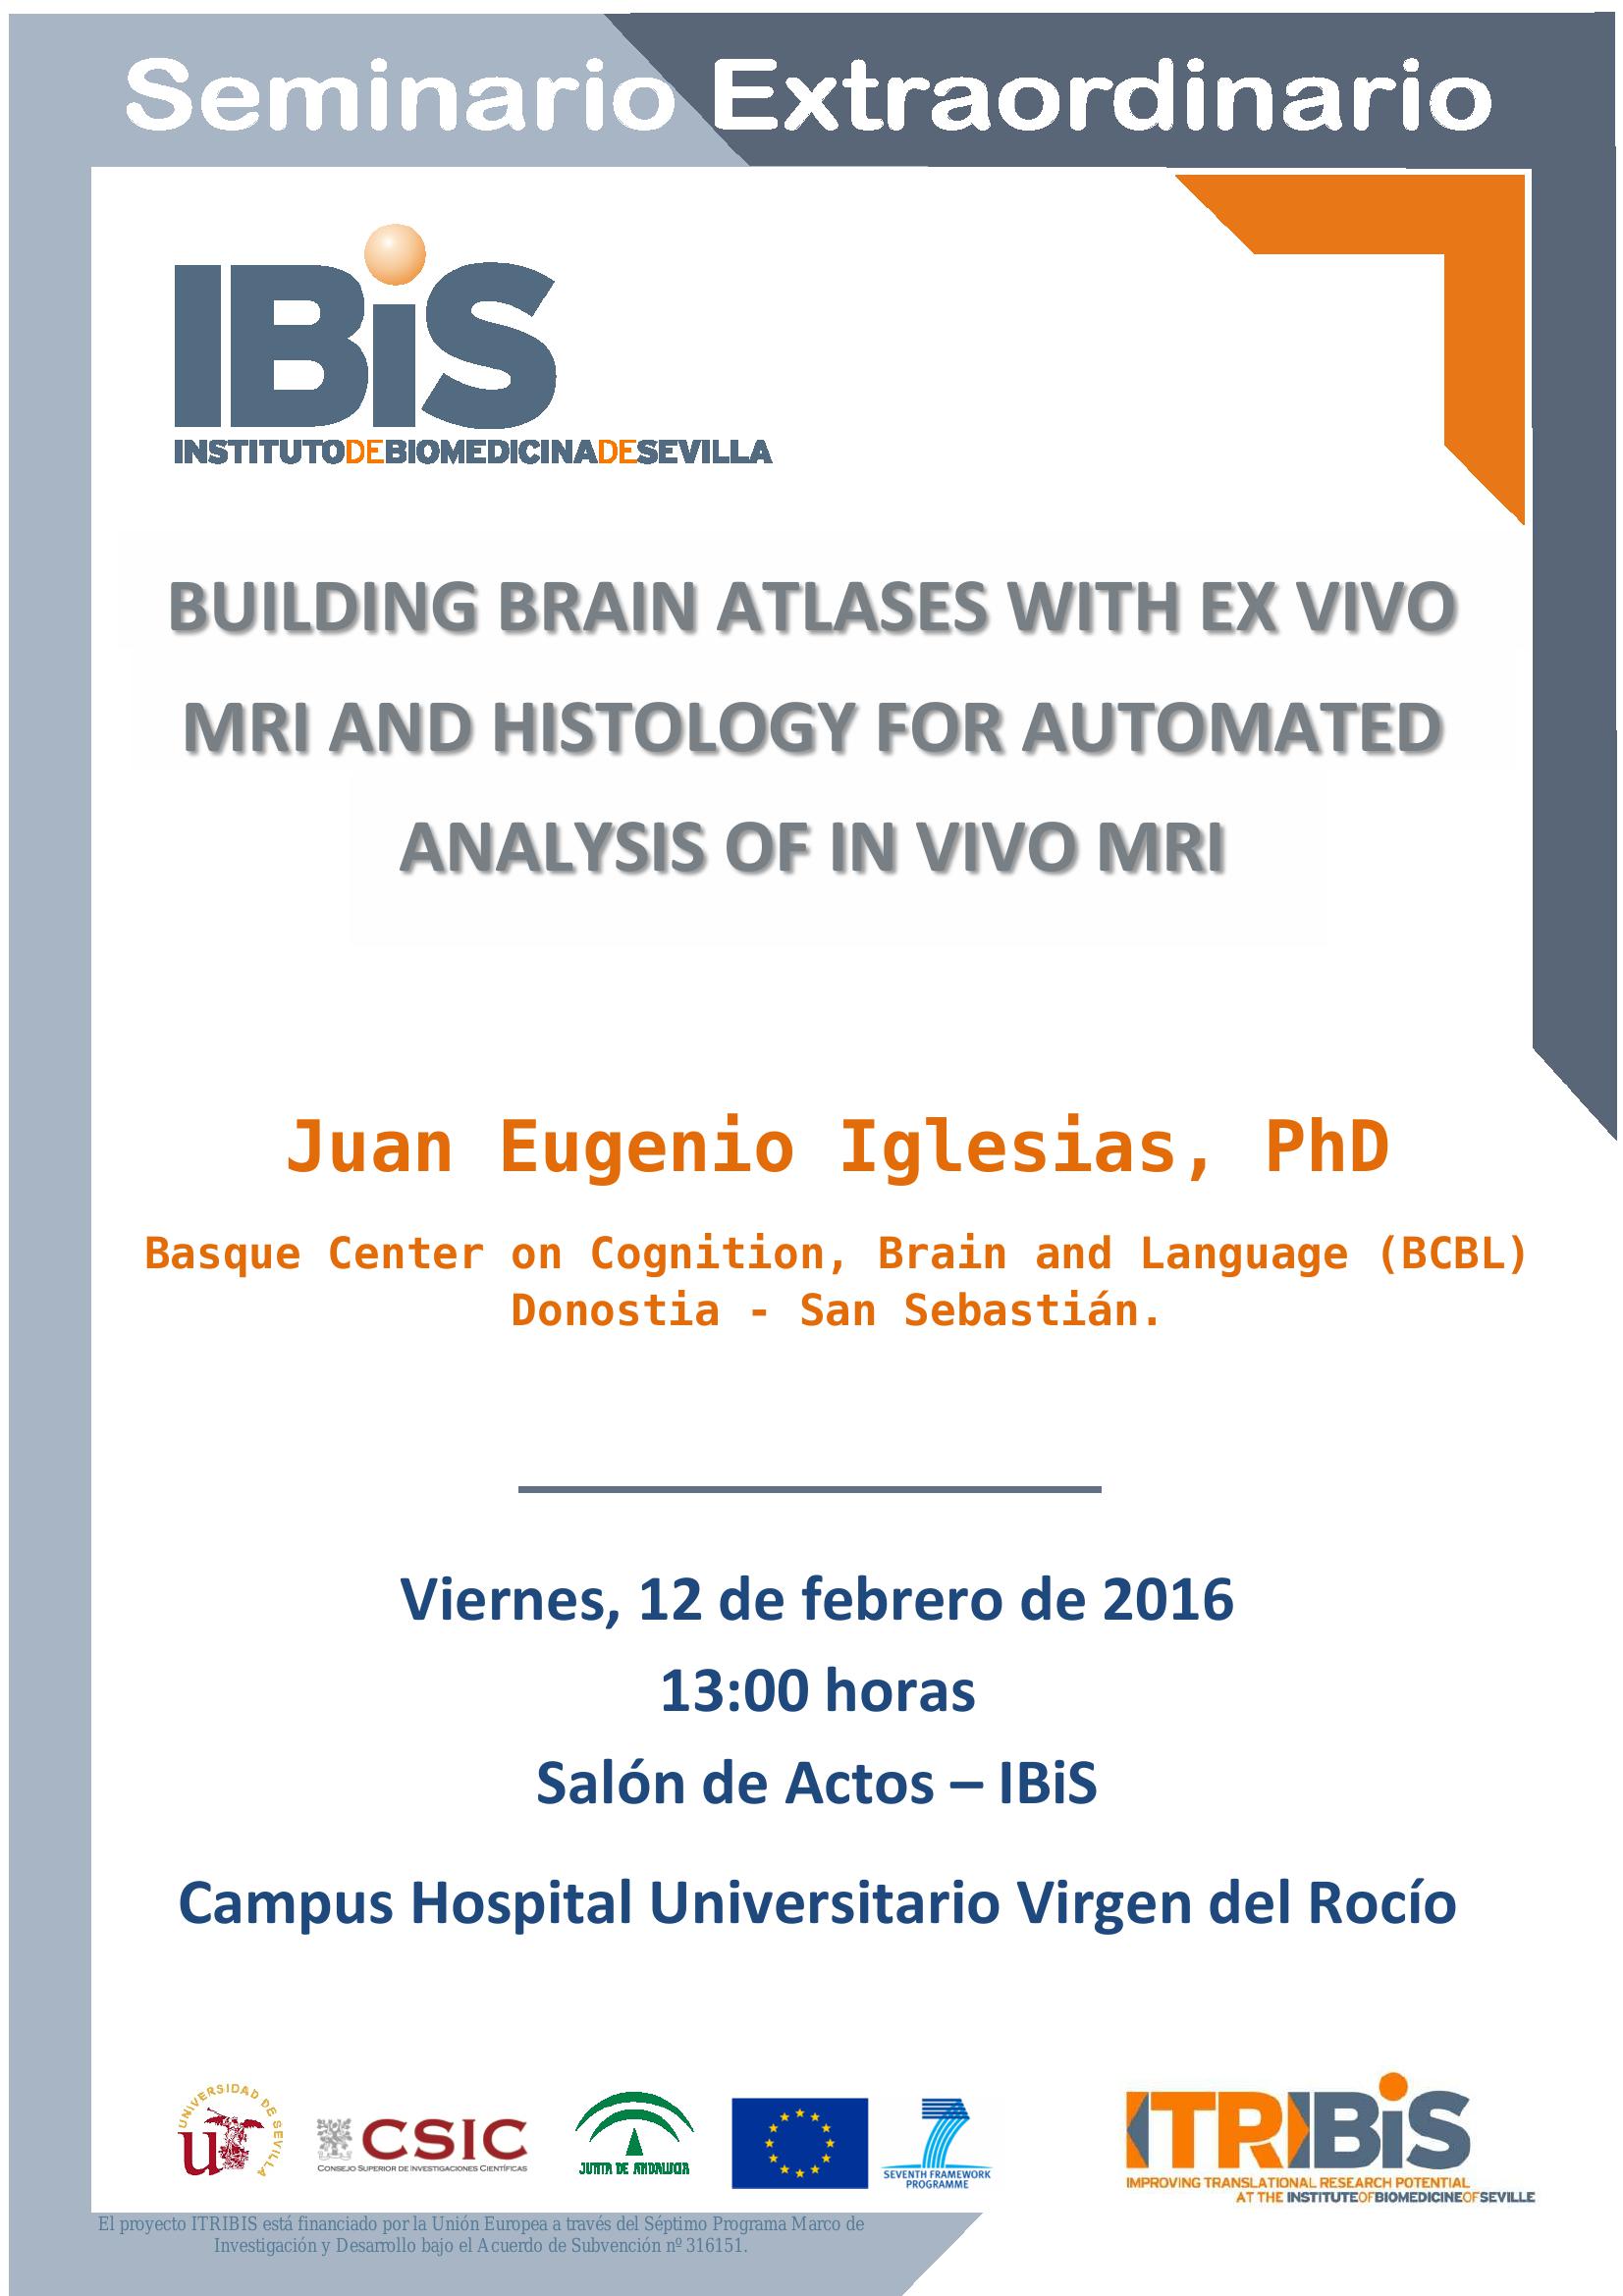 Poster: BUILDING BRAIN ATLASES WITH EX VIVO MRI AND HISTOLOGY FOR AUTOMATED ANALYSIS OF IN VIVO MRI